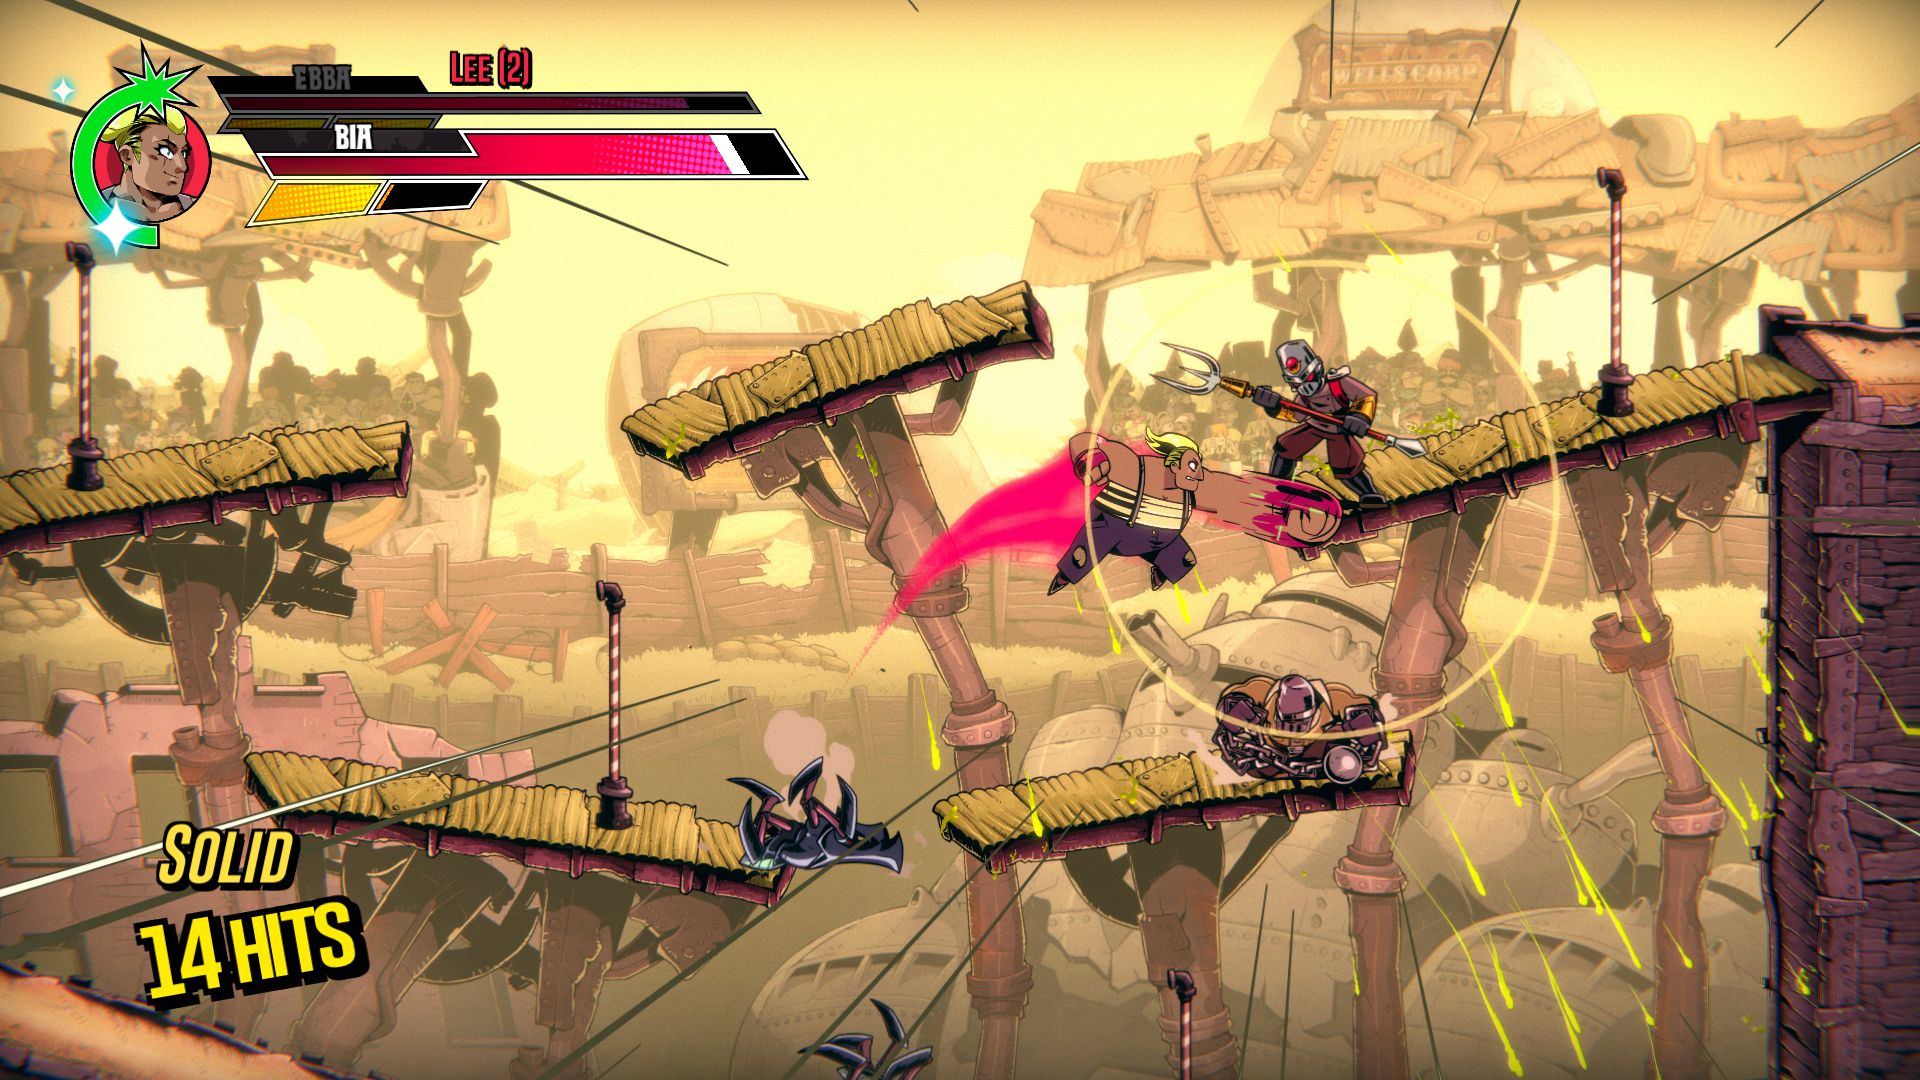 Speed Brawl Review: Being Fast Isn’t Everything